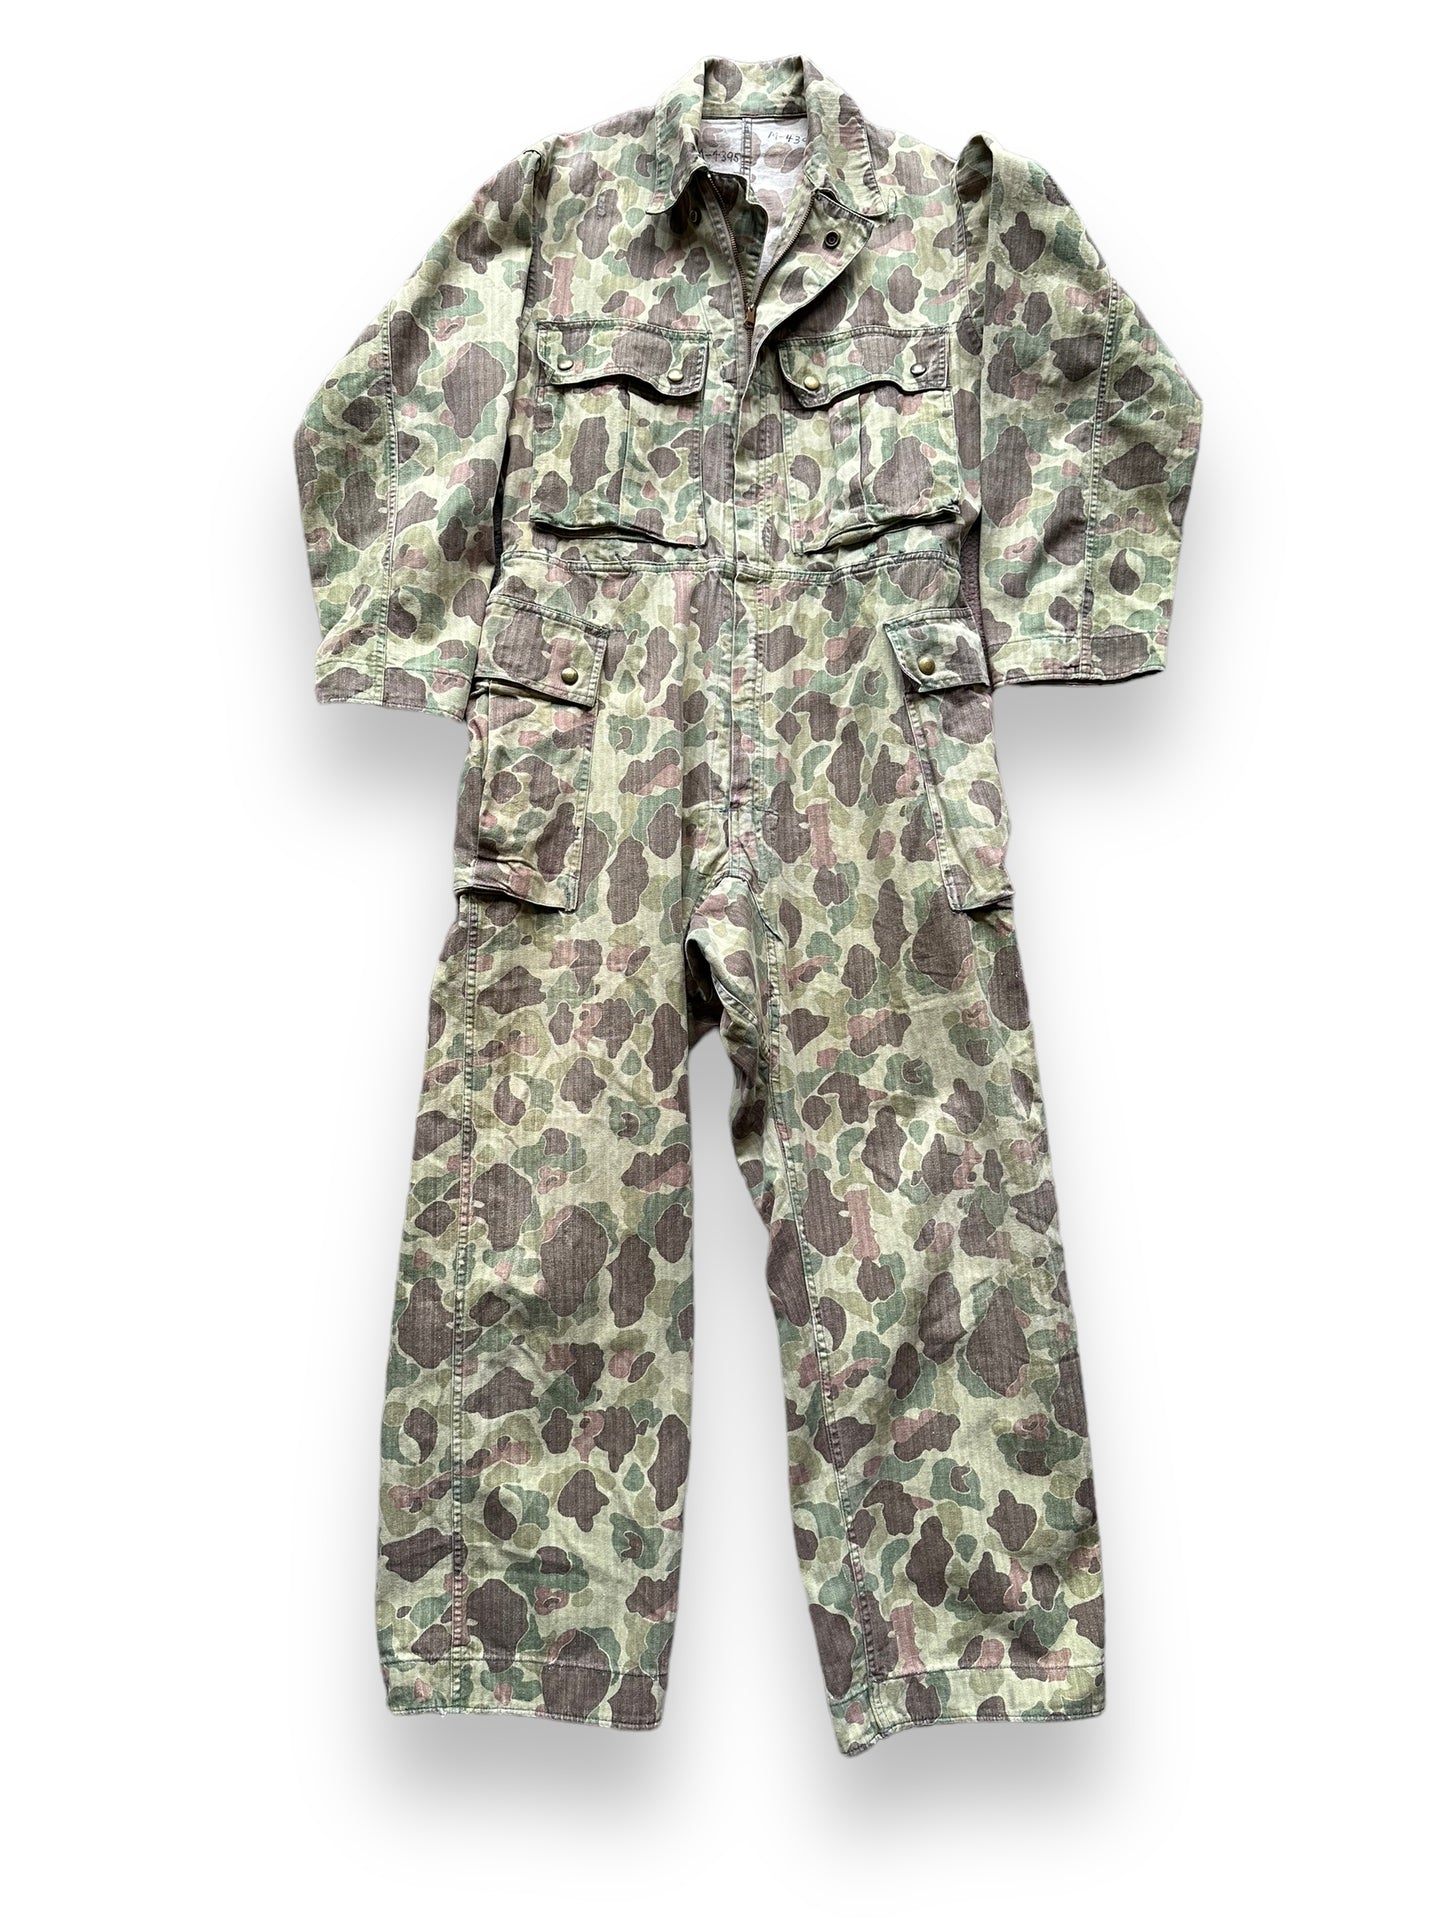 Front View of Vintage M-4395 HBT Frogskin Camo Coveralls SZ M | Vintage Frog Skin Camo Pants Seattle | Barn Owl Vintage Workwear